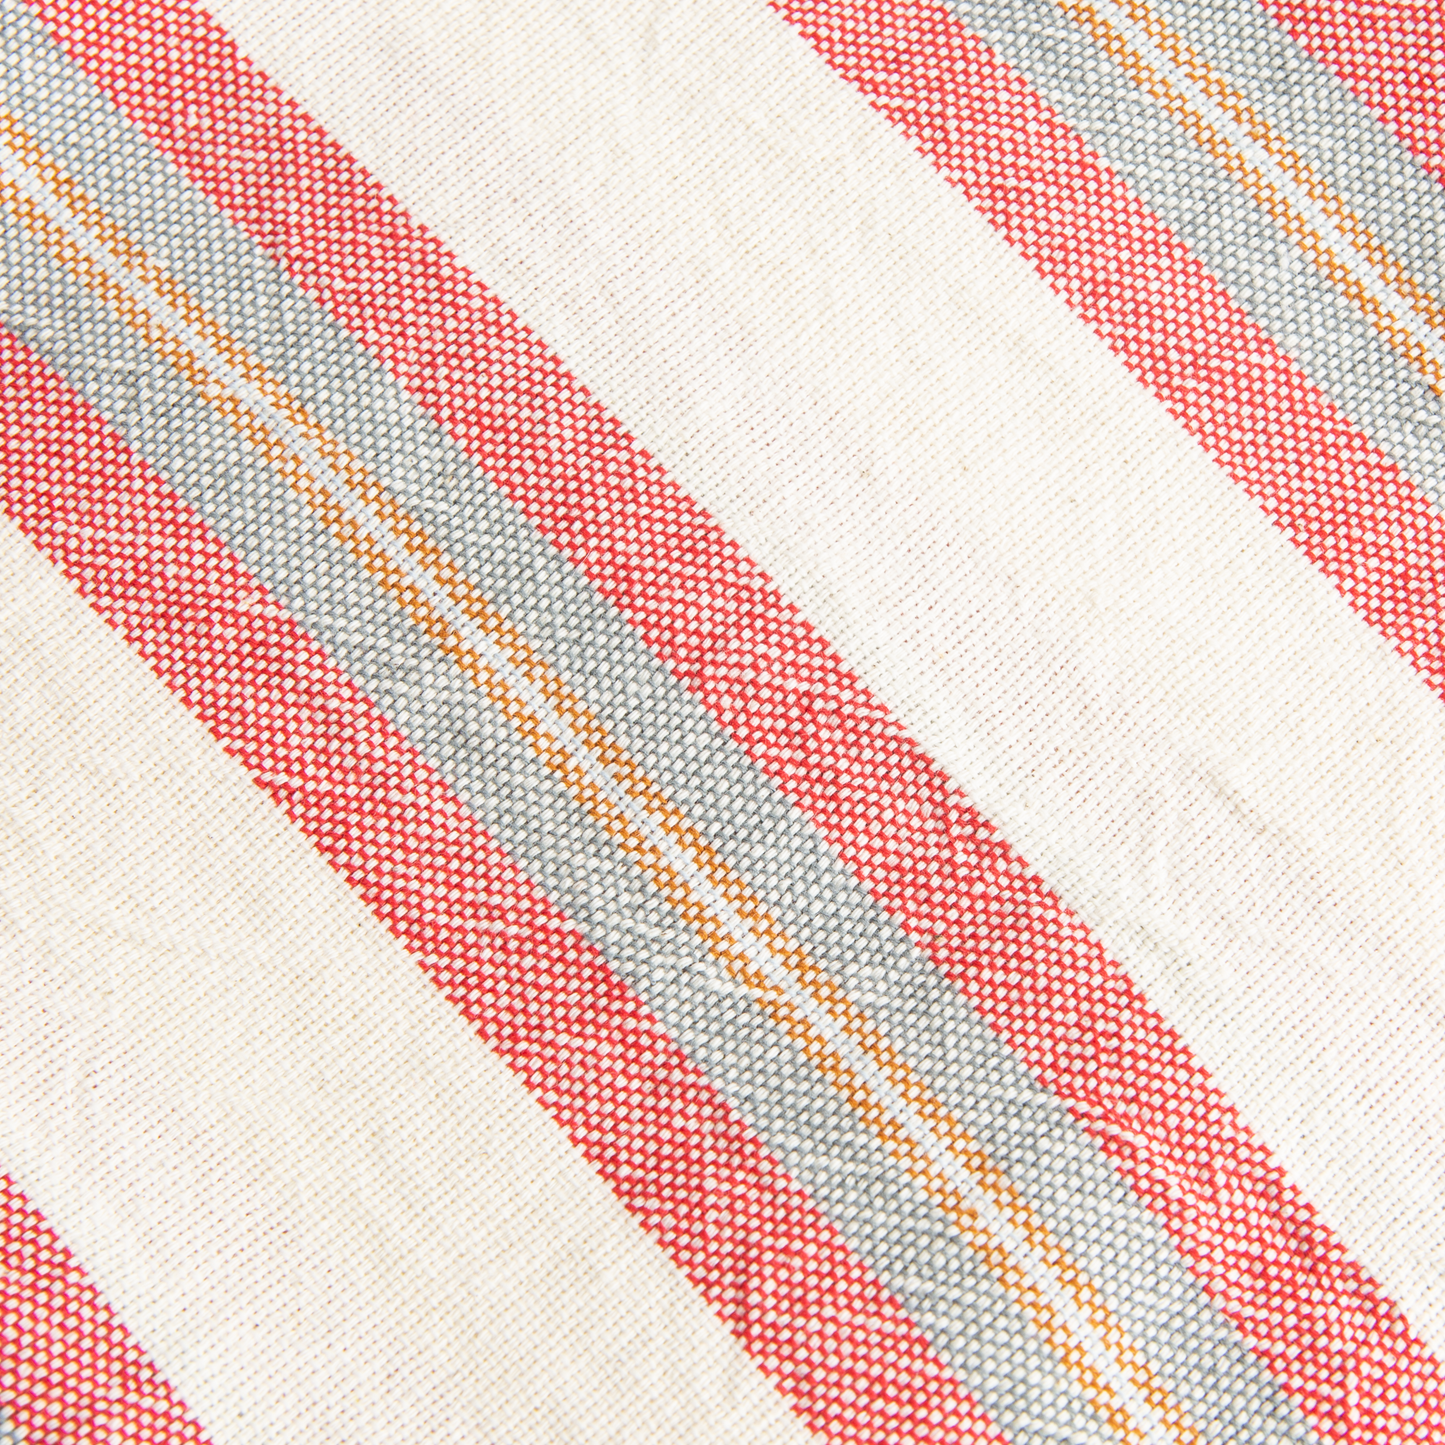 Turkish Towels - Red & Gray